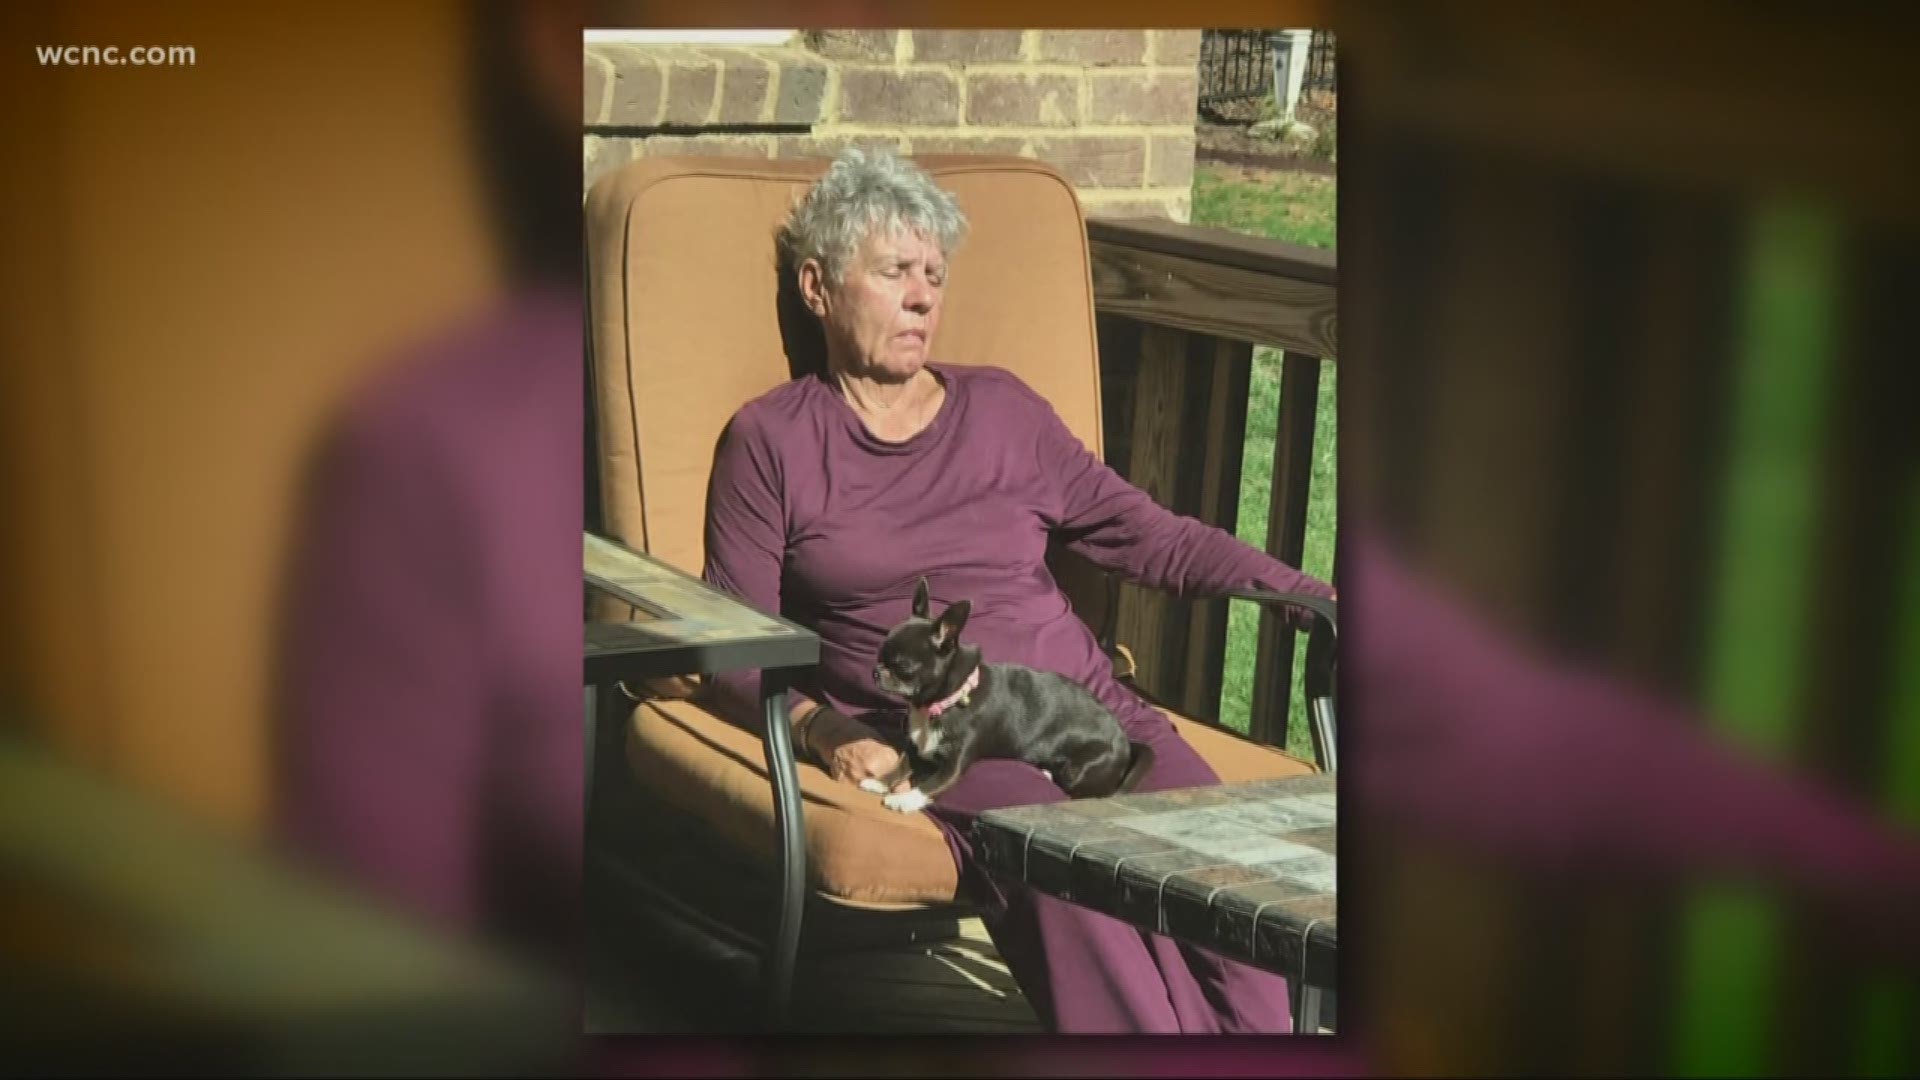 Officials say she suffers from dementia and other medical conditions.